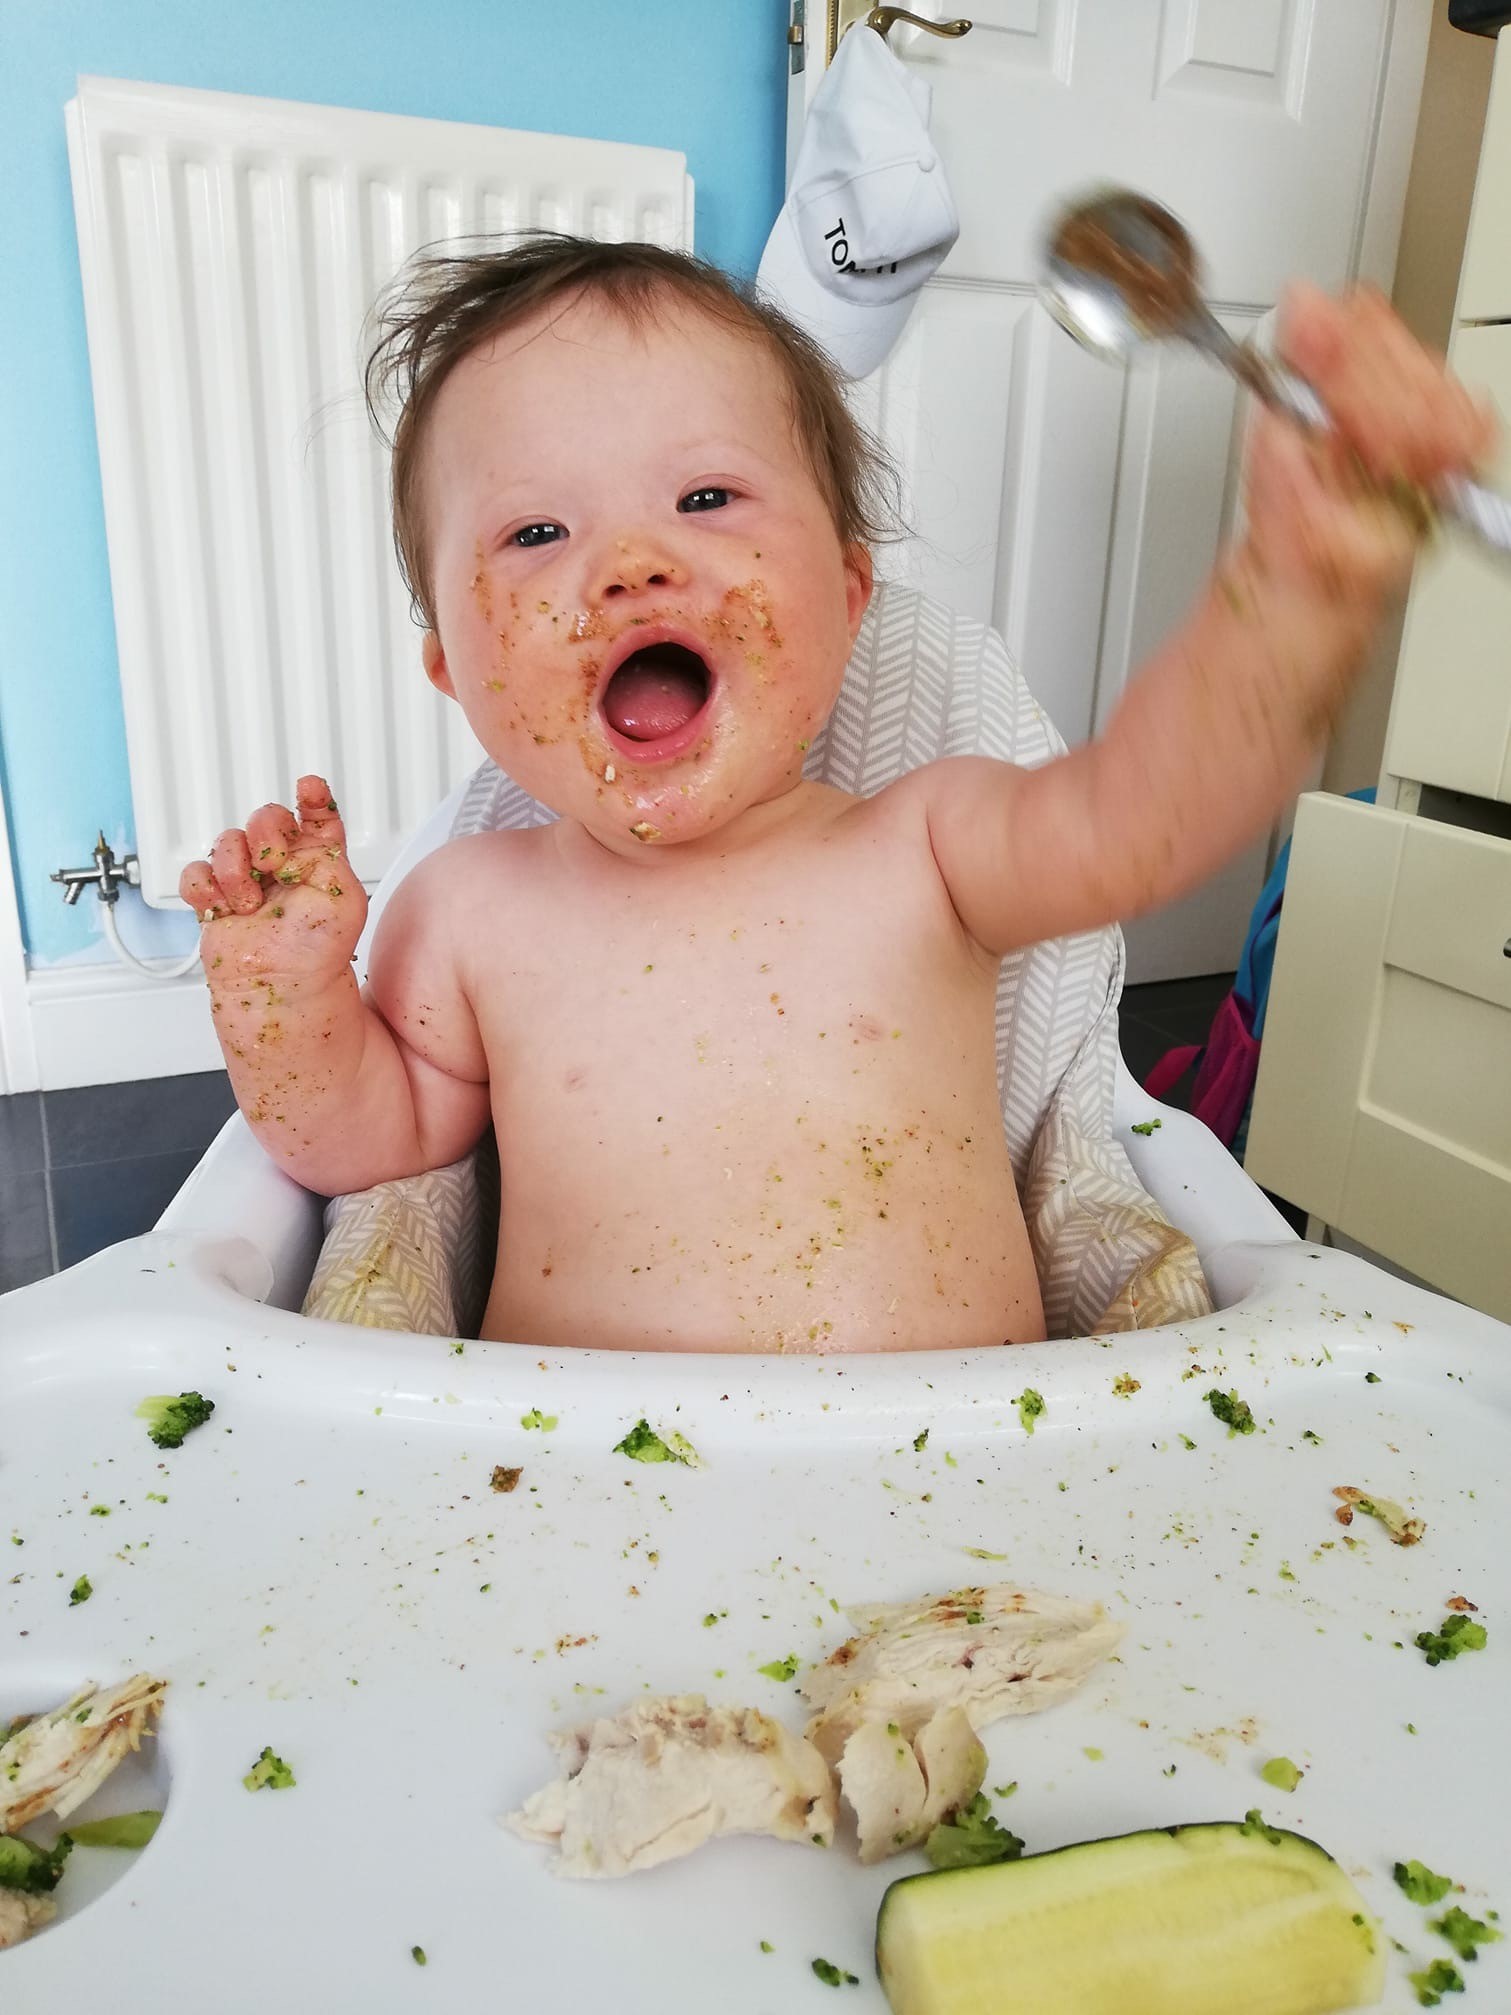 Baby-led weaning: 10 tips to get you started | NCT